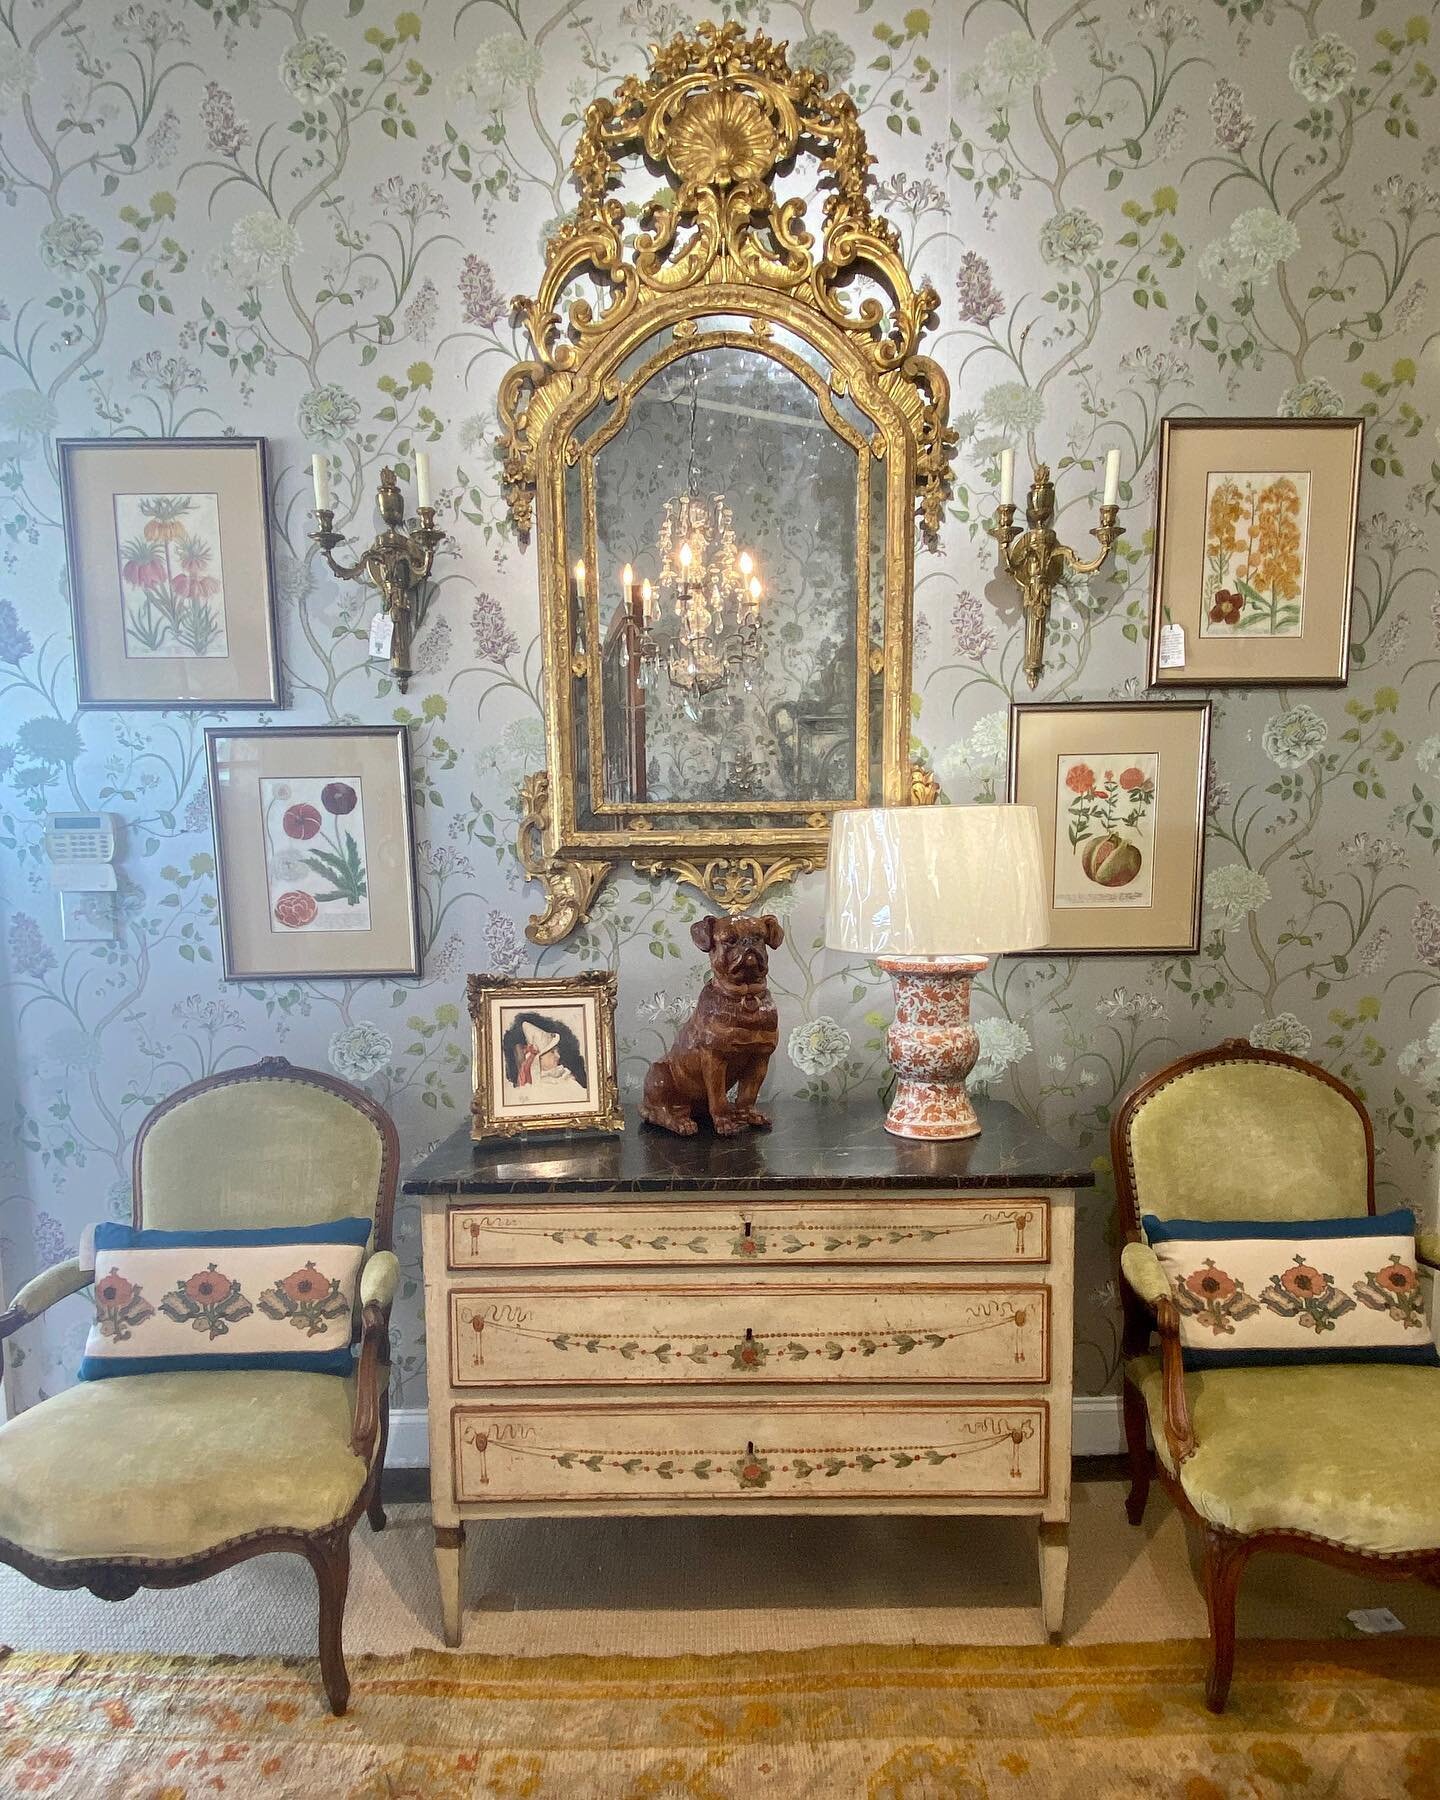 Our shipment is ready for public consumption! Please come see us at Wolf Hall! 
.
.
.
#wolfhall #wolfhallantiques #antiquedealersofinstagram #antique #dallasinteriordesigner #dallasdesigndistrict #texasinteriordesigner #antiqueshop #fineantiques #tim